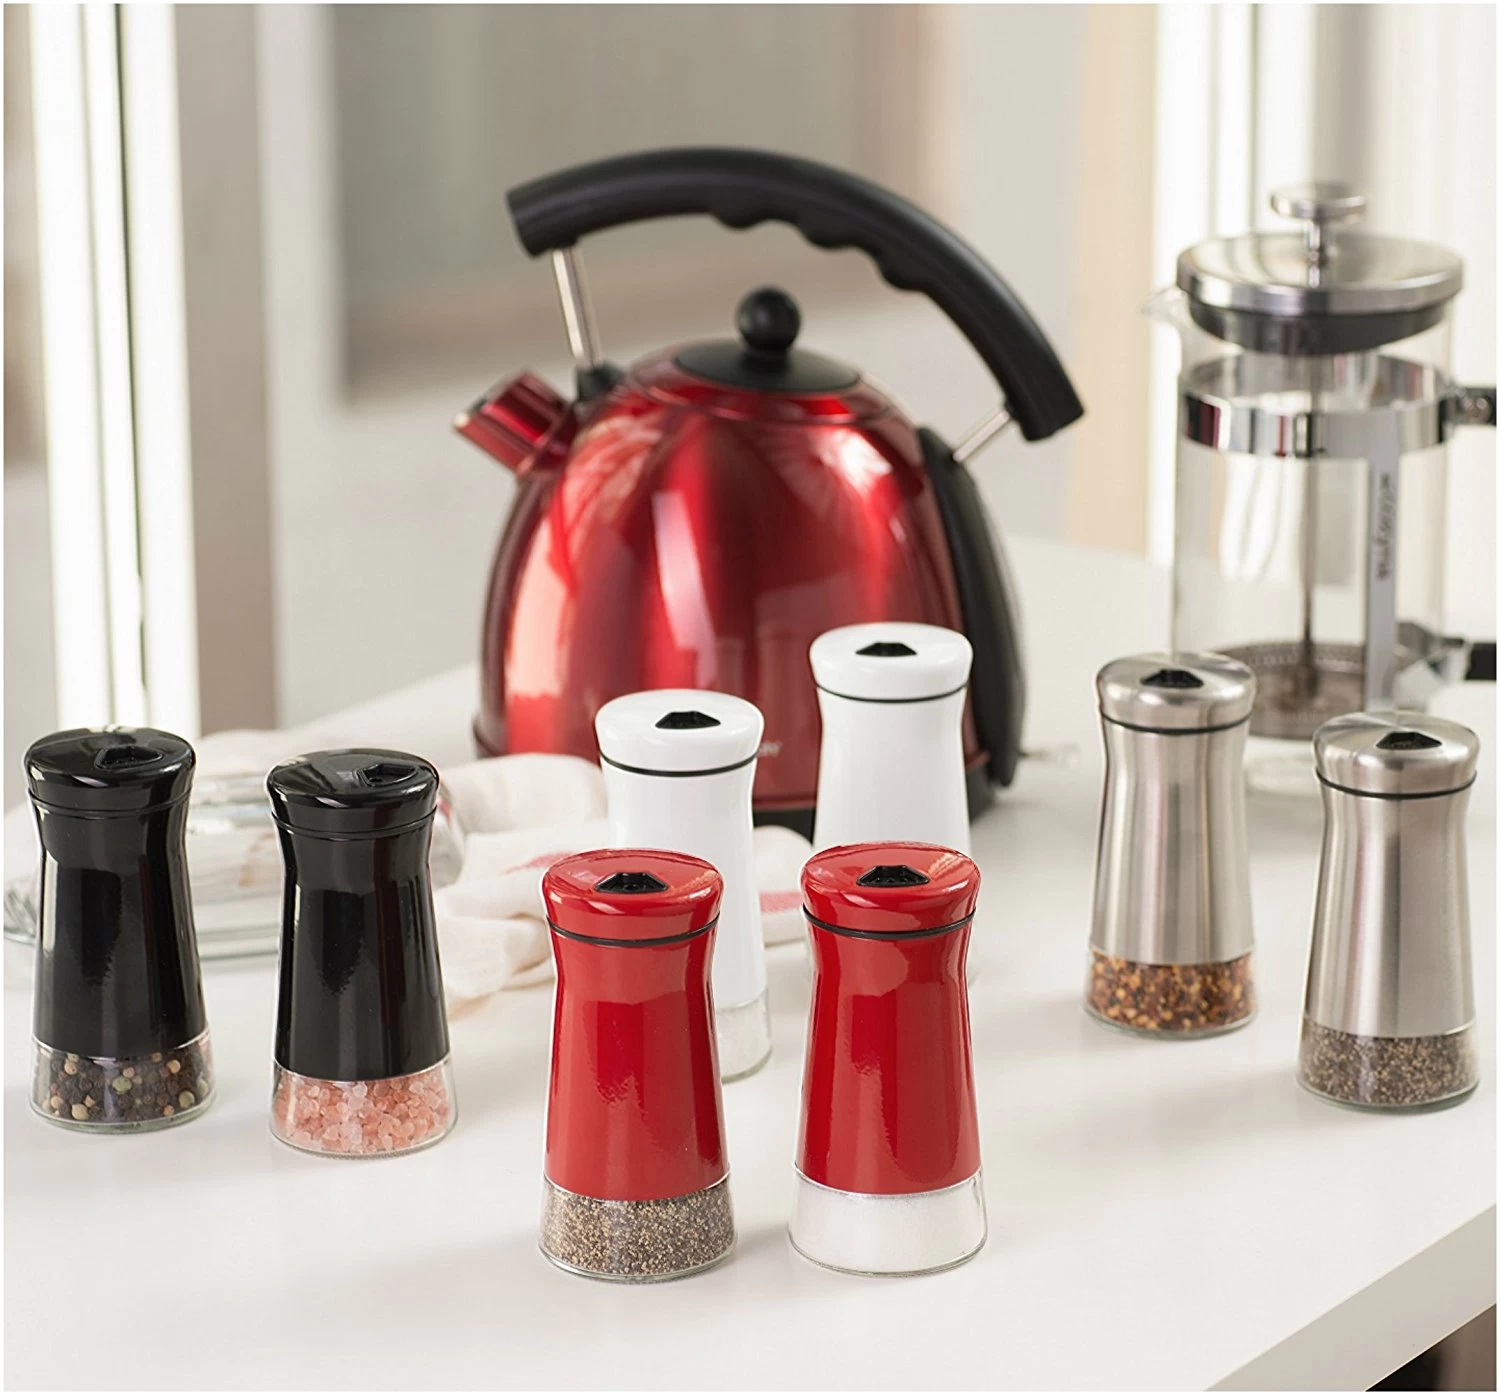 Salt and Pepper Shakers Set with Adjustable Holes